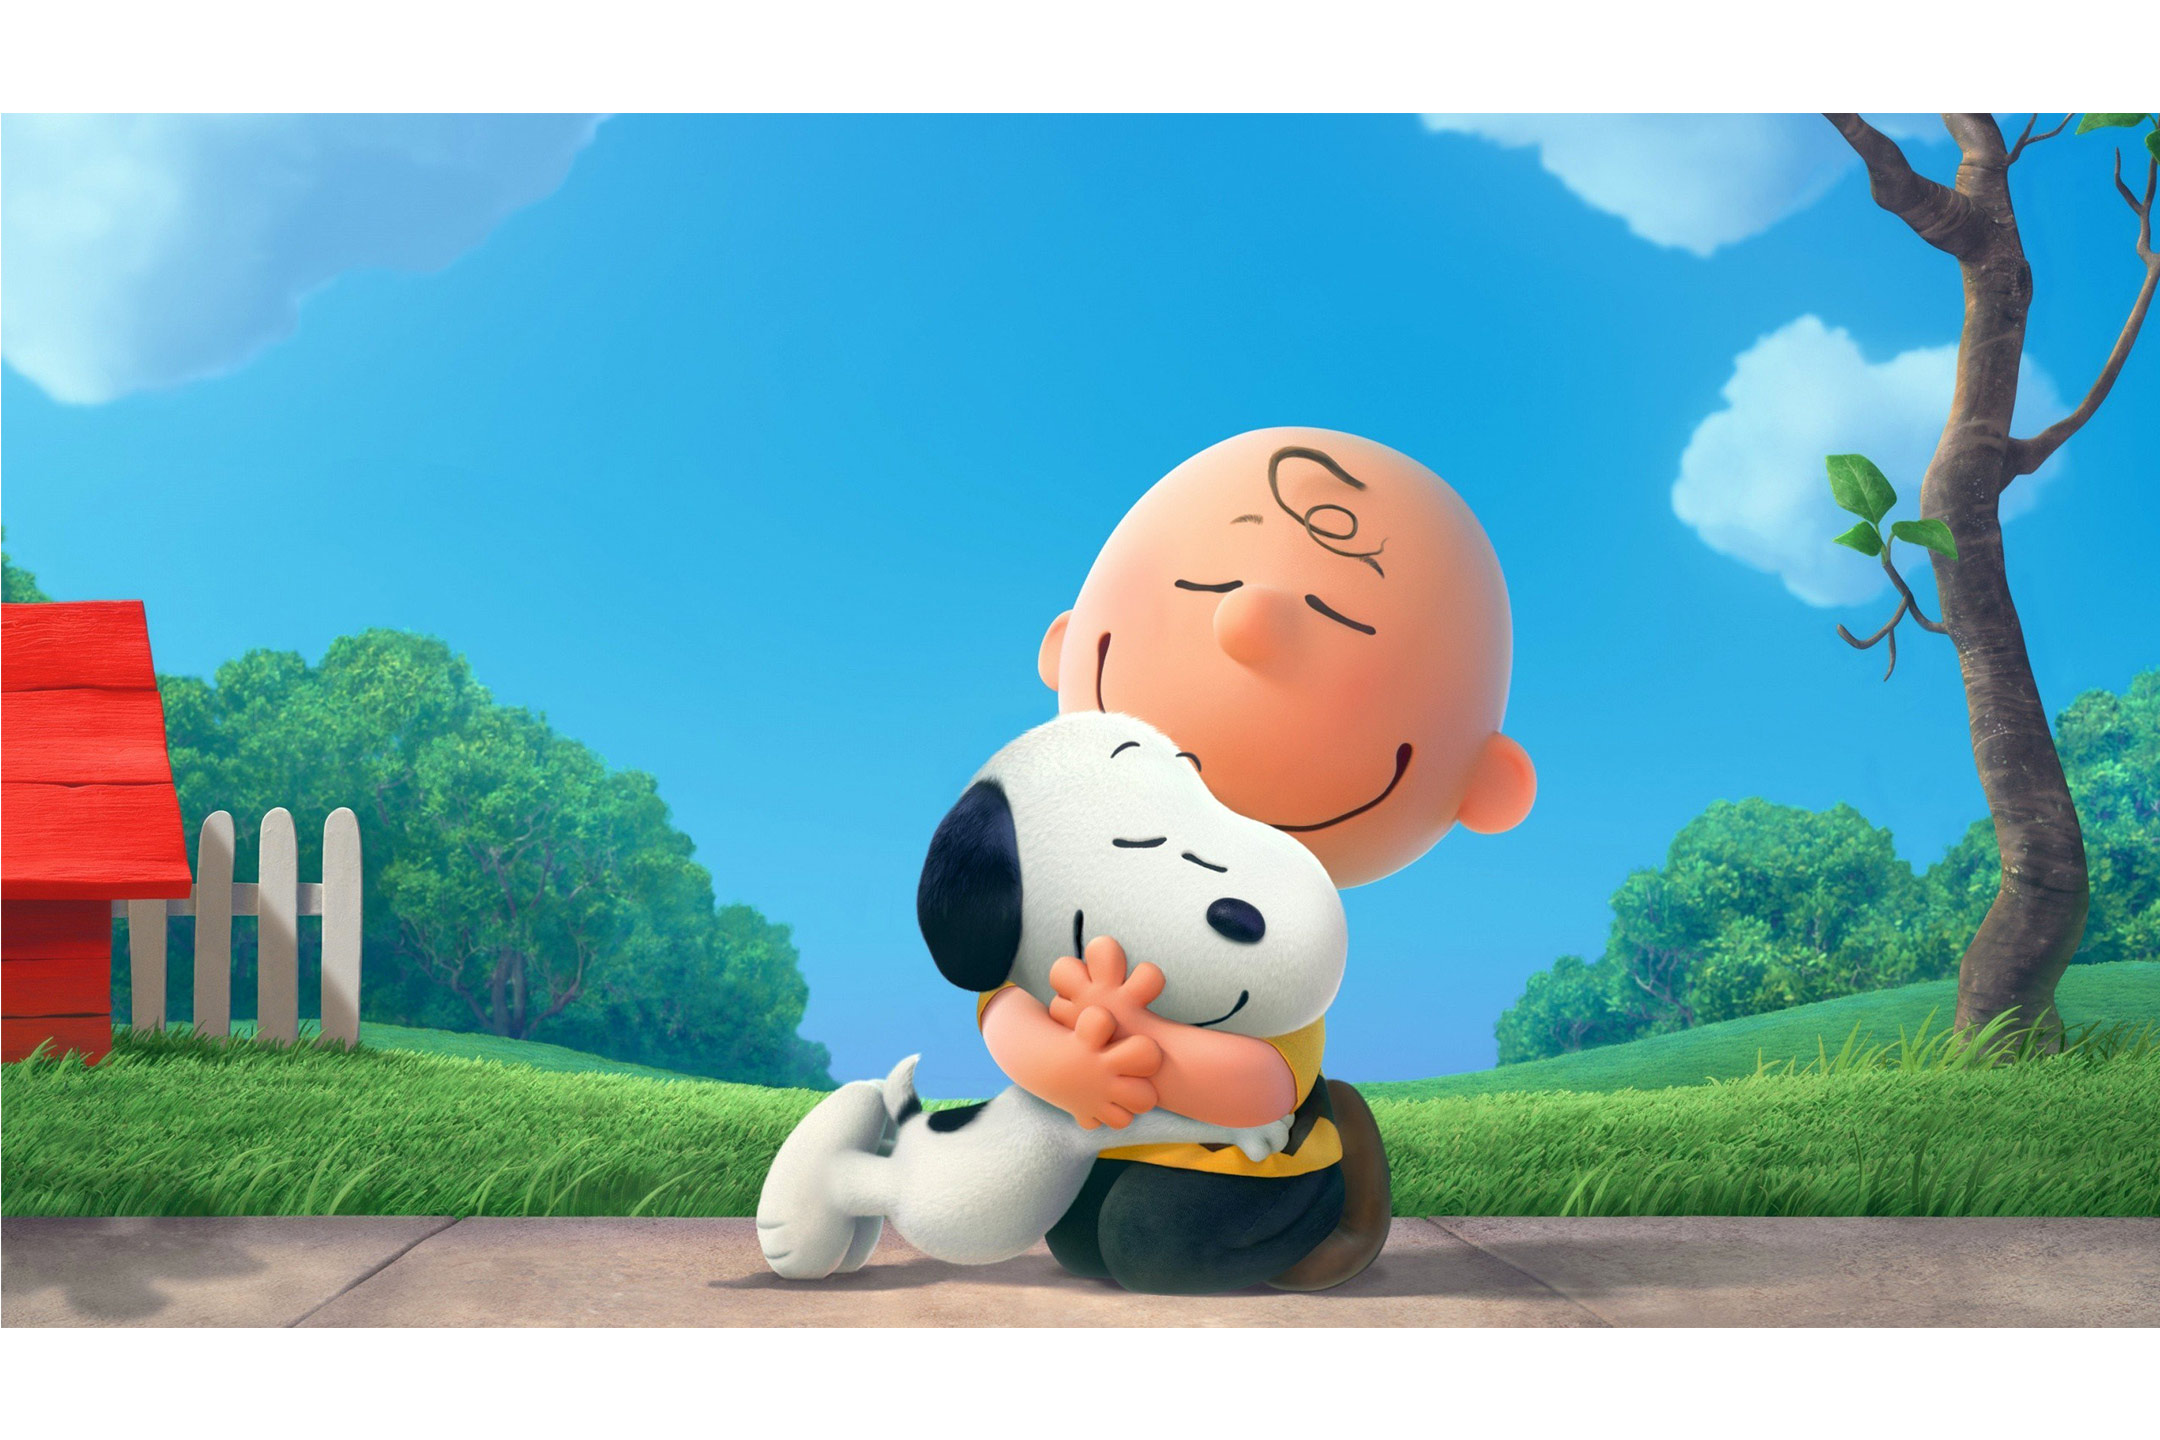 26 Feb Top 10 Fictional Kids Of All Time - Snoopy E Charlie Brown , HD Wallpaper & Backgrounds